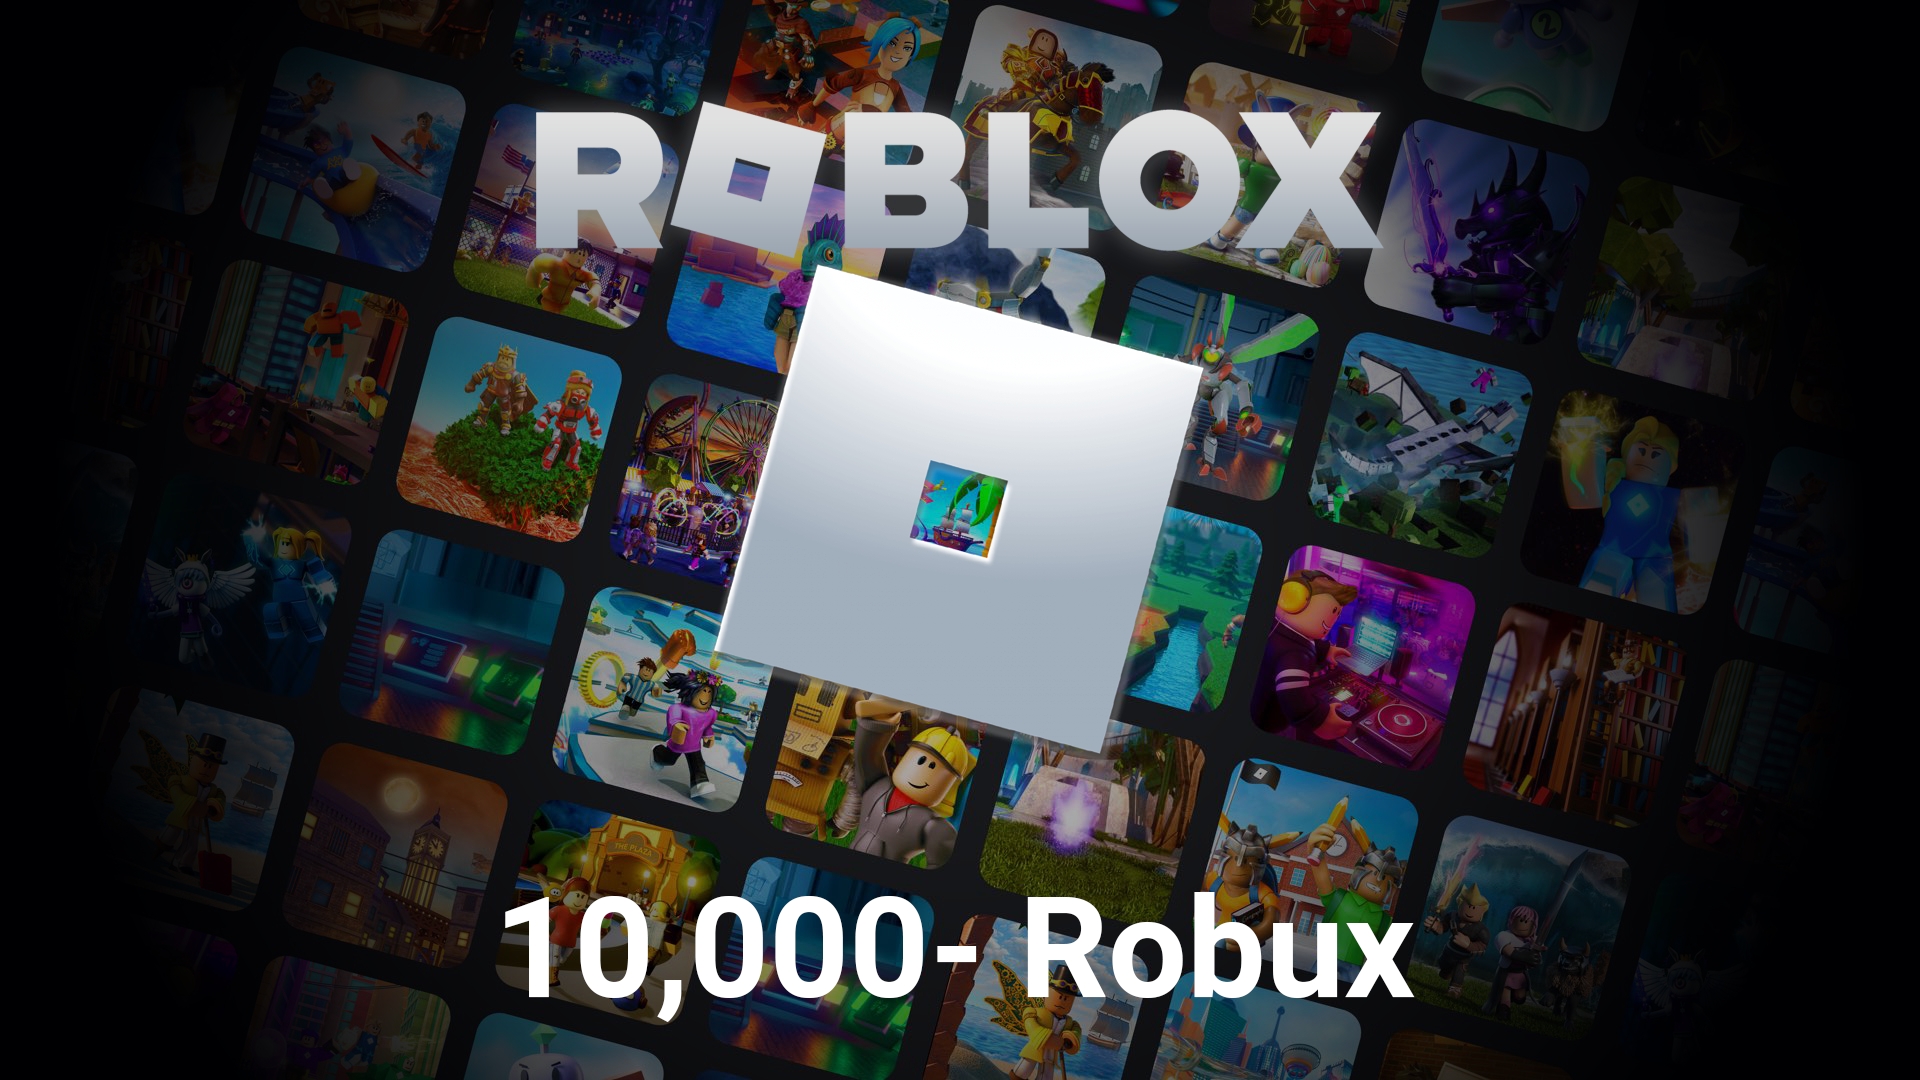 Can You Buy Robux With Xbox Gift Card?